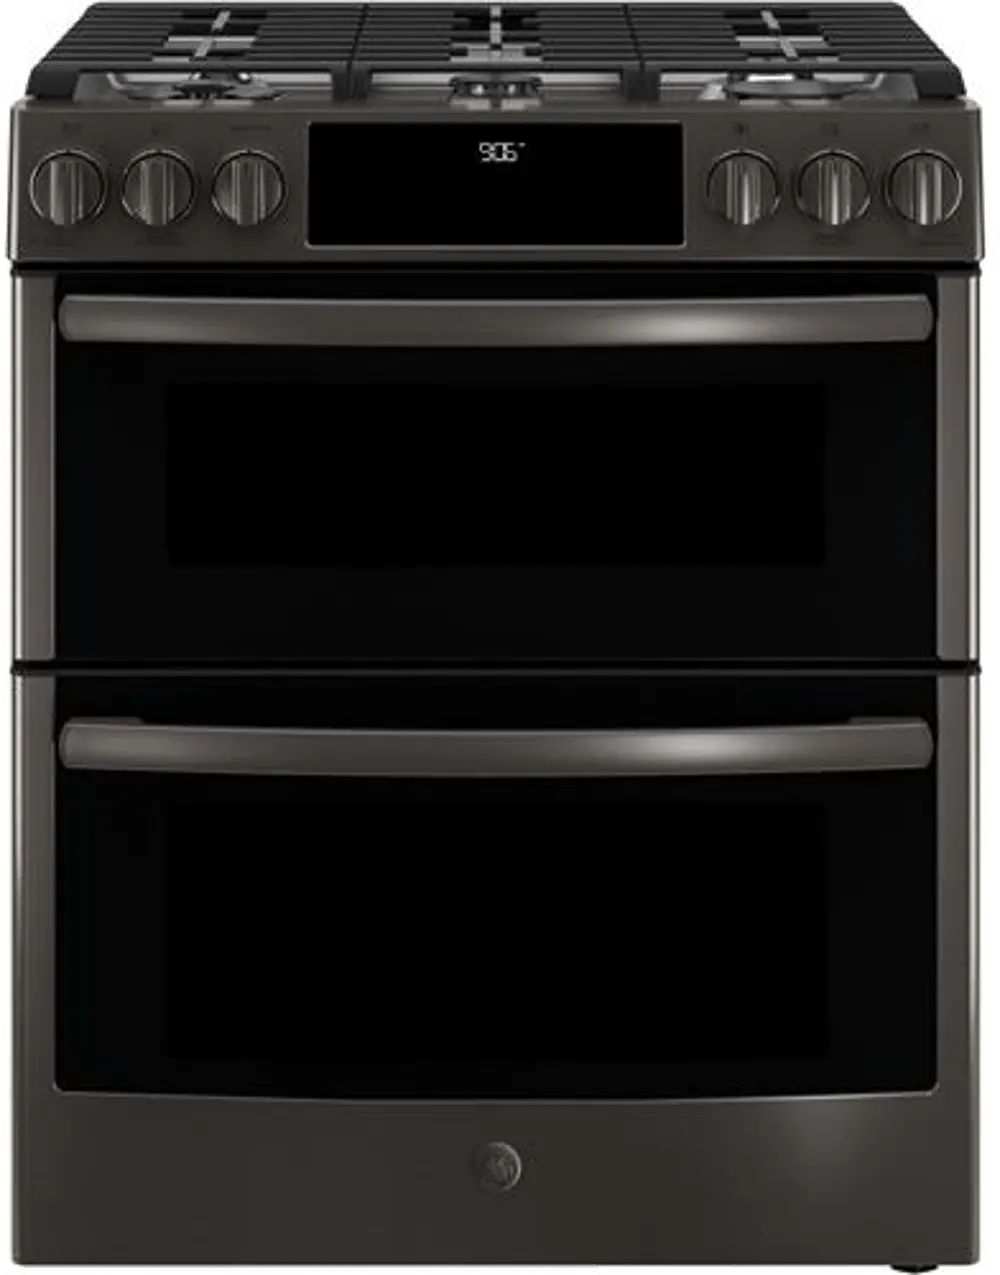 PGS960BELTS GE Profile Double Oven Gas Range - 6.7 cu. ft. Black Stainless Steel-1